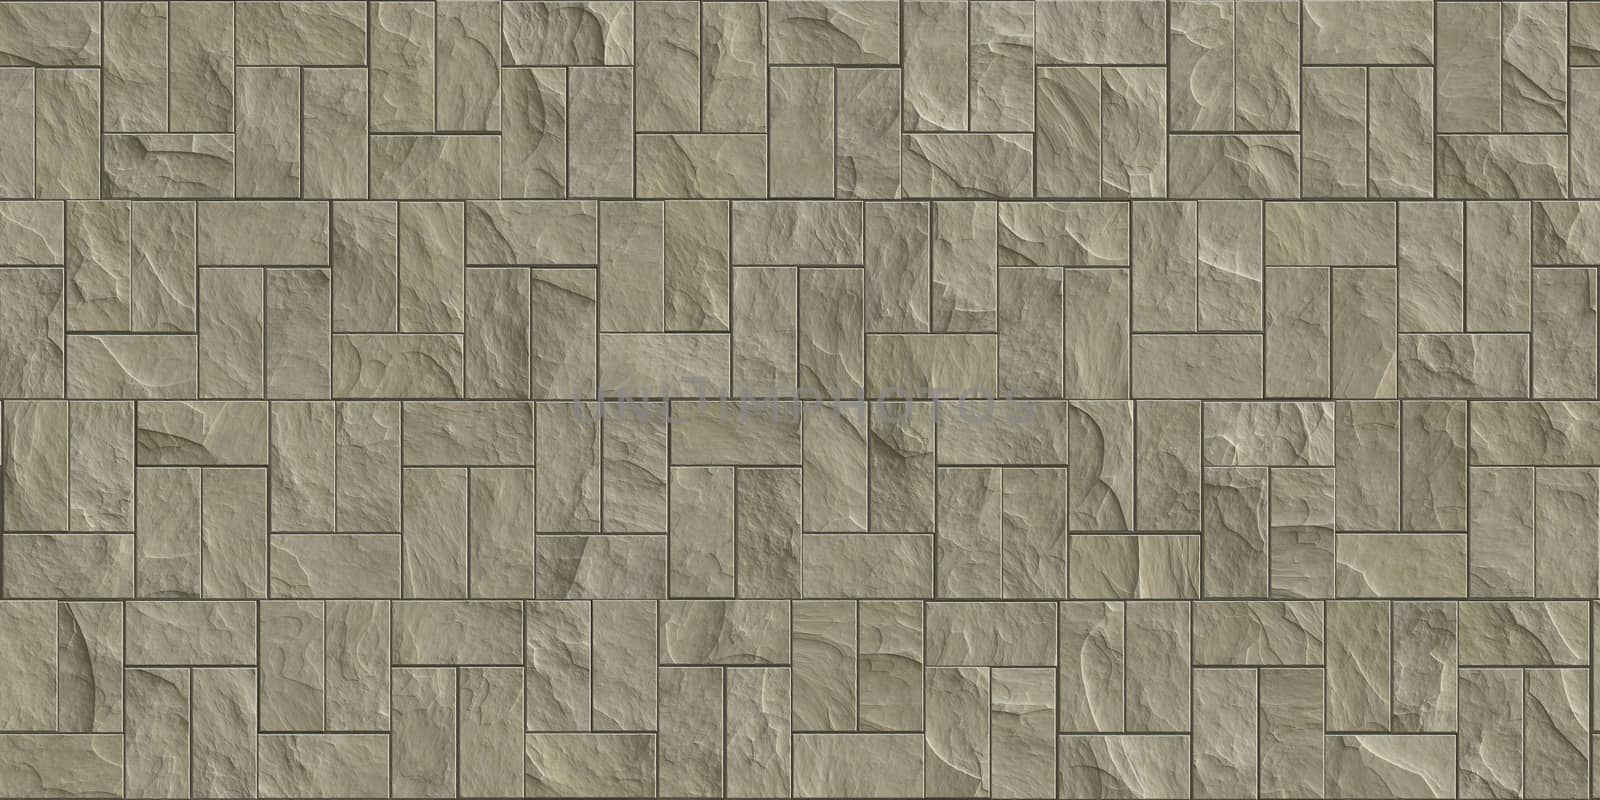 Beige outdoor stone cladding seamless surface. Stone tiles facing house wall.